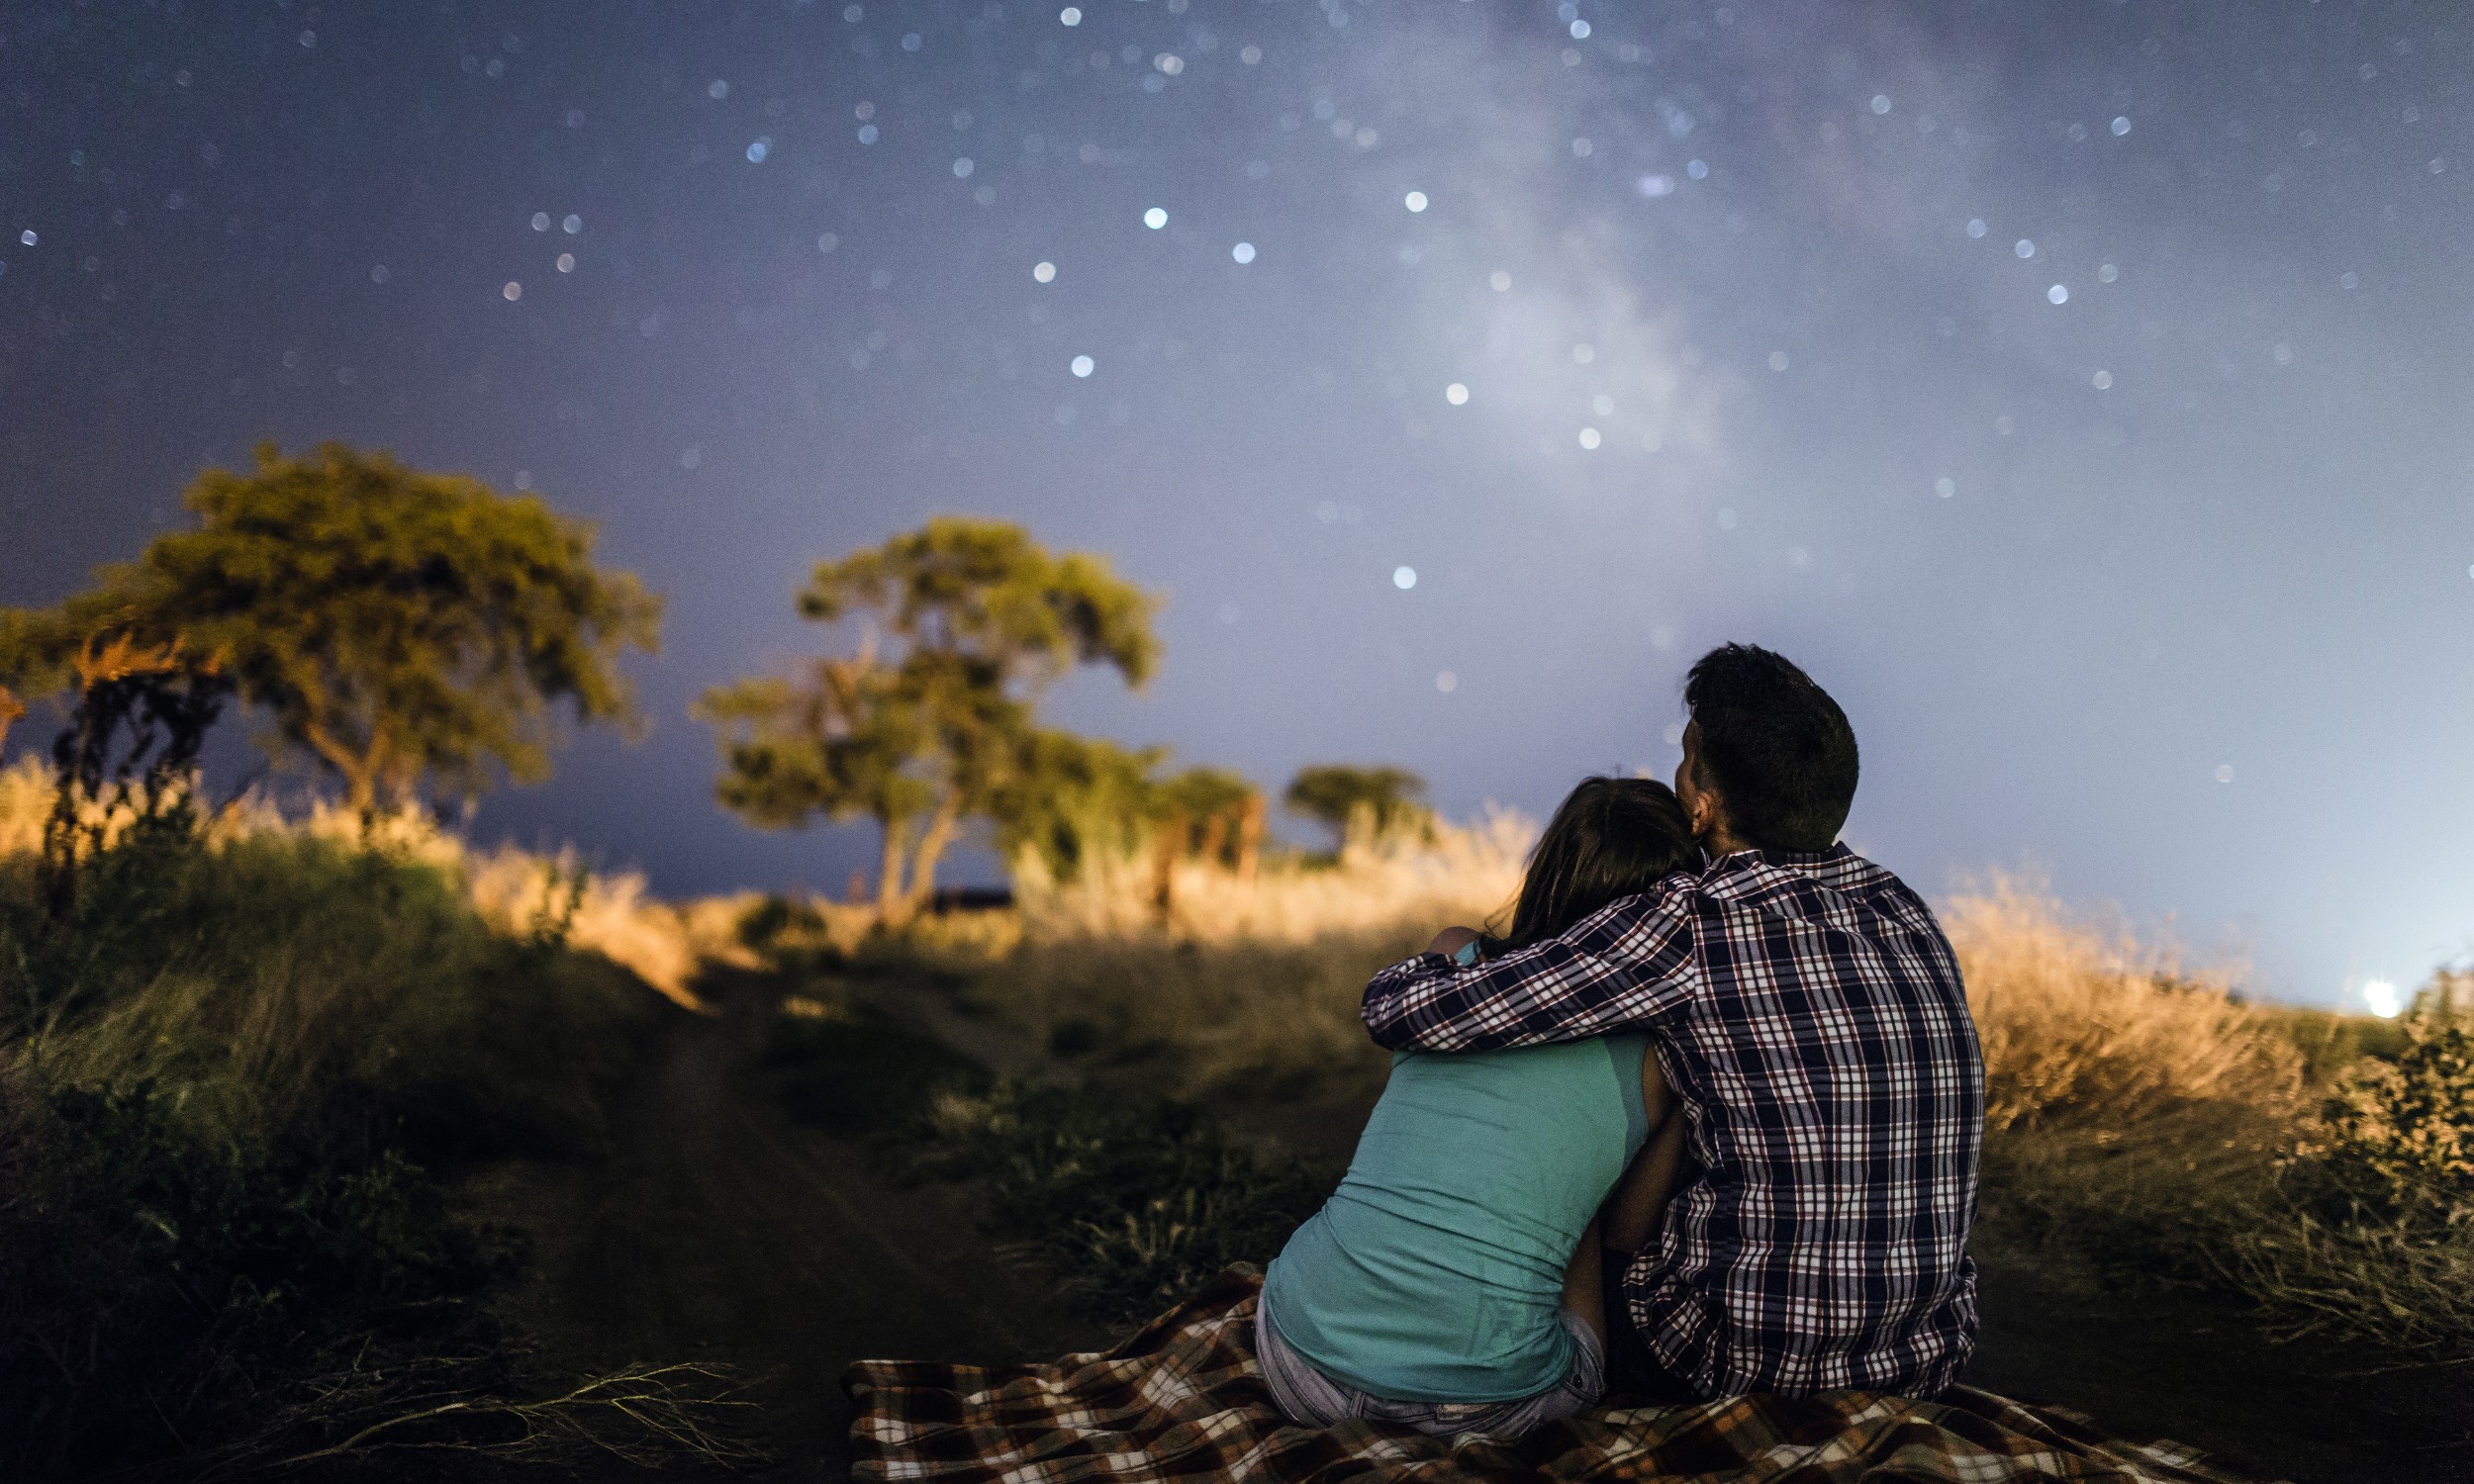 couple-in-love-under-stars-of-milky-way-galaxy-picture-id675004800